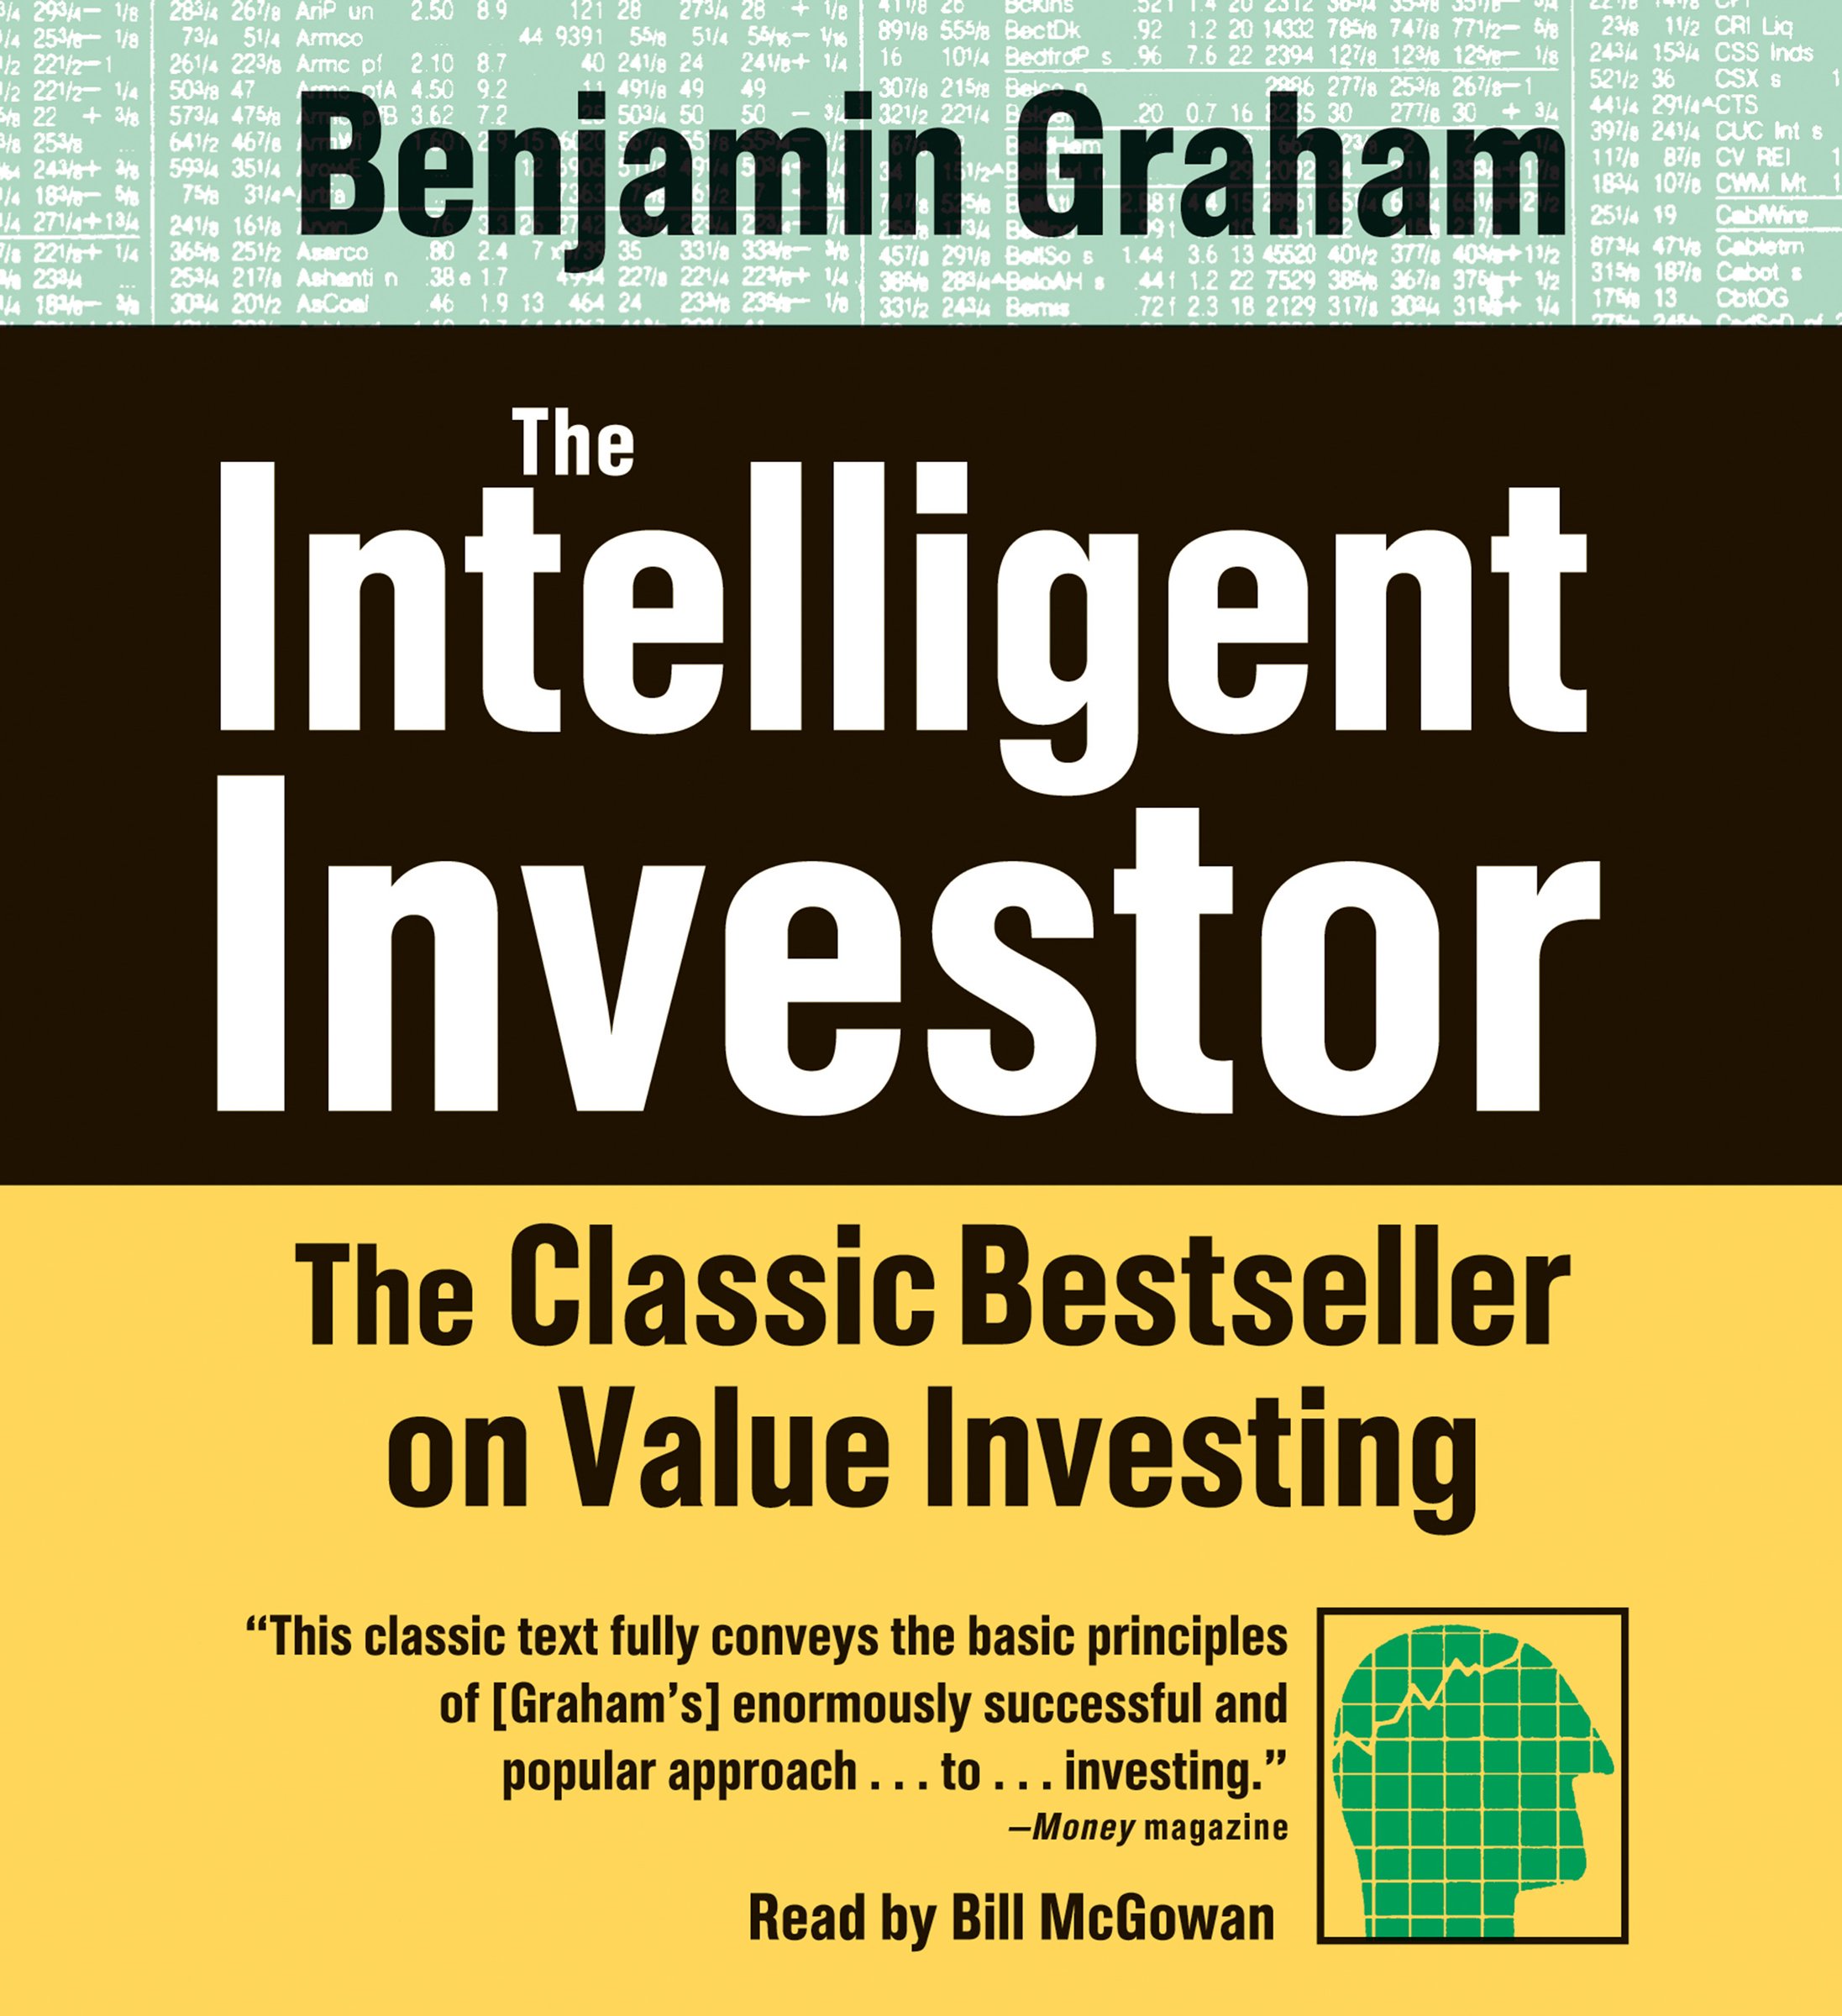 The Intelligent Investor: The Classic Best Seller on Value Investing